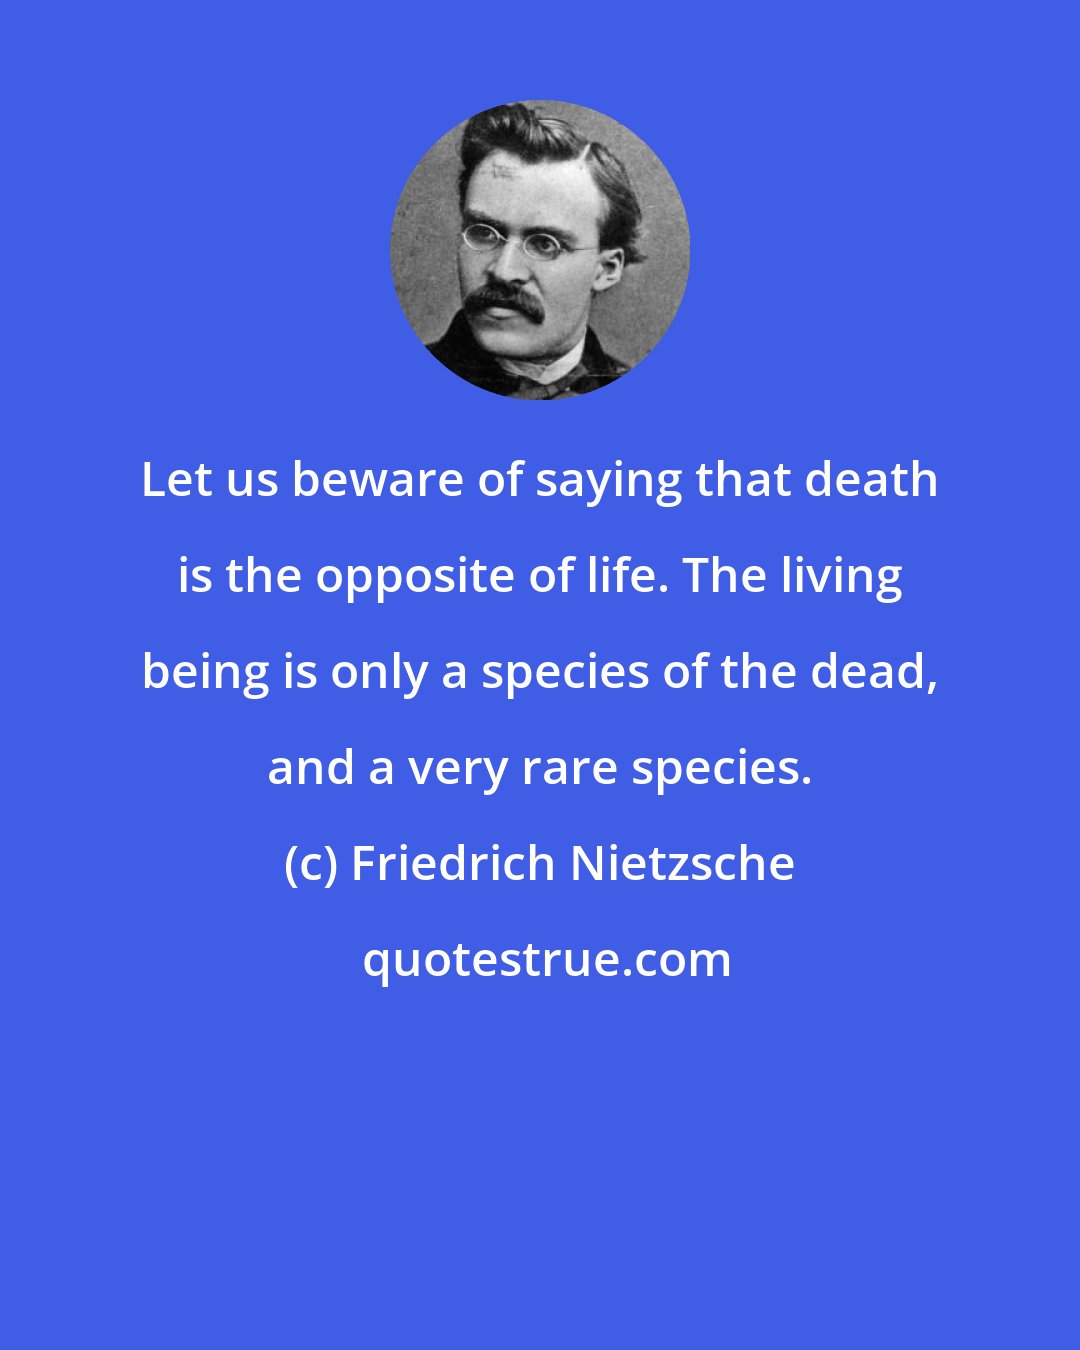 Friedrich Nietzsche: Let us beware of saying that death is the opposite of life. The living being is only a species of the dead, and a very rare species.